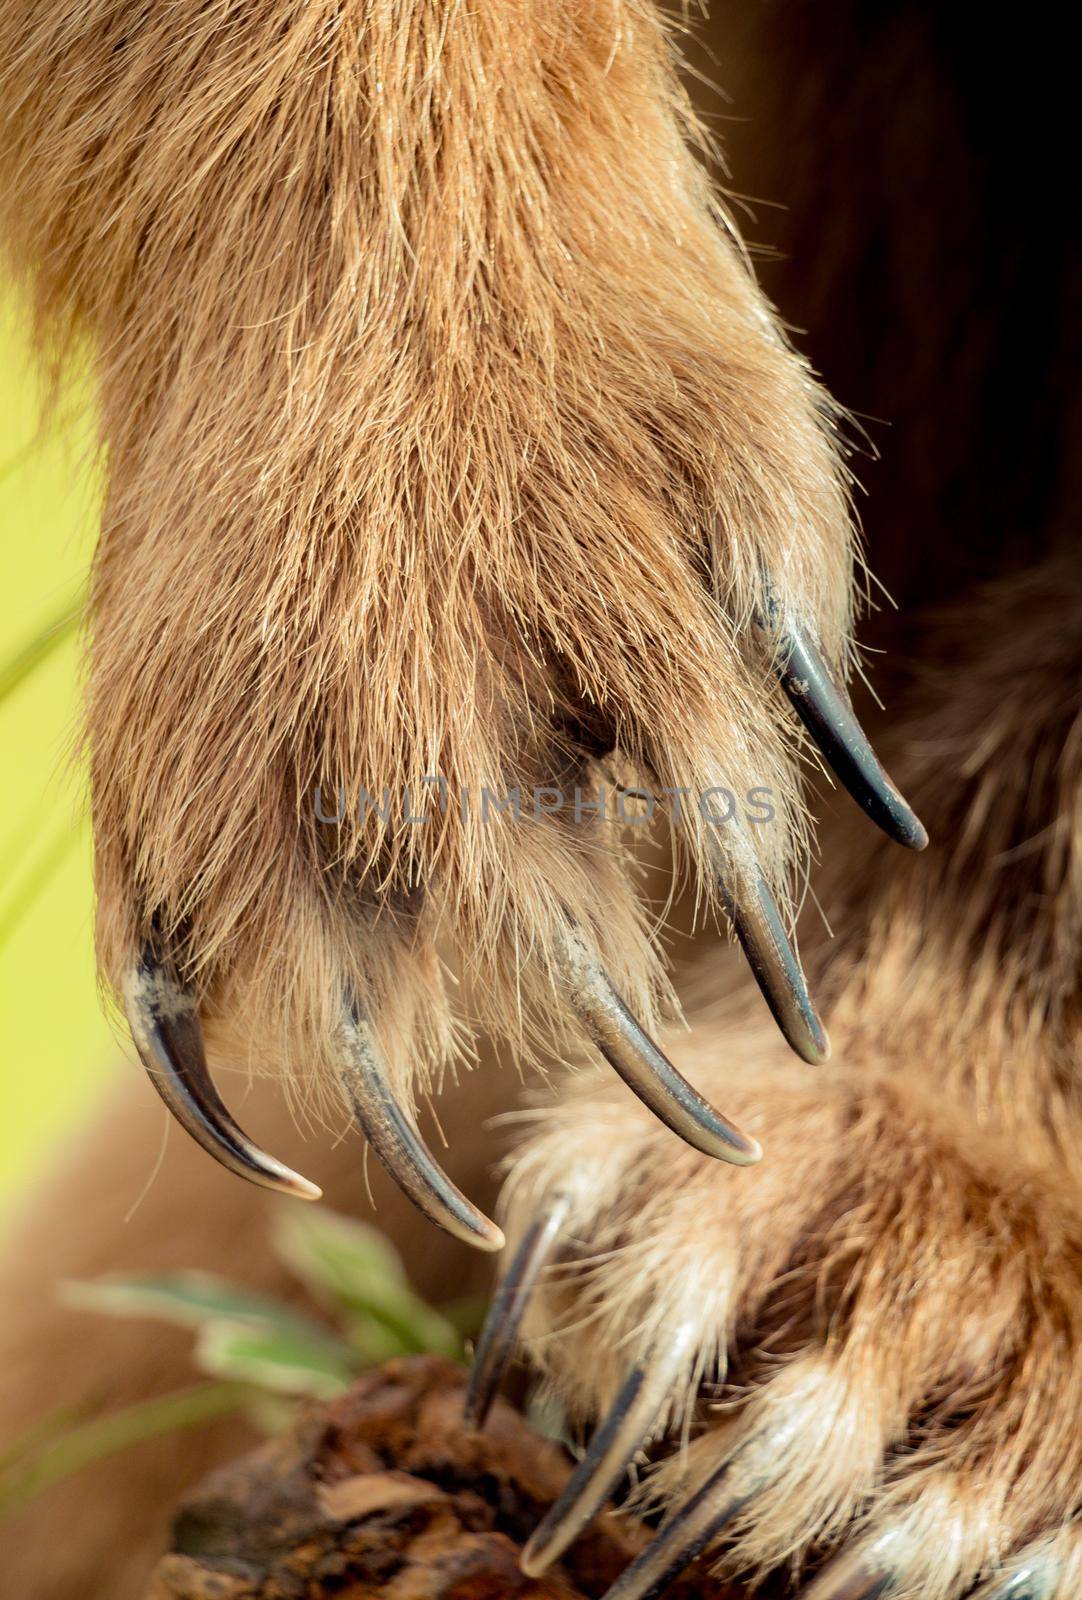 Brown Bear Paw With sharp Claws  by berkay